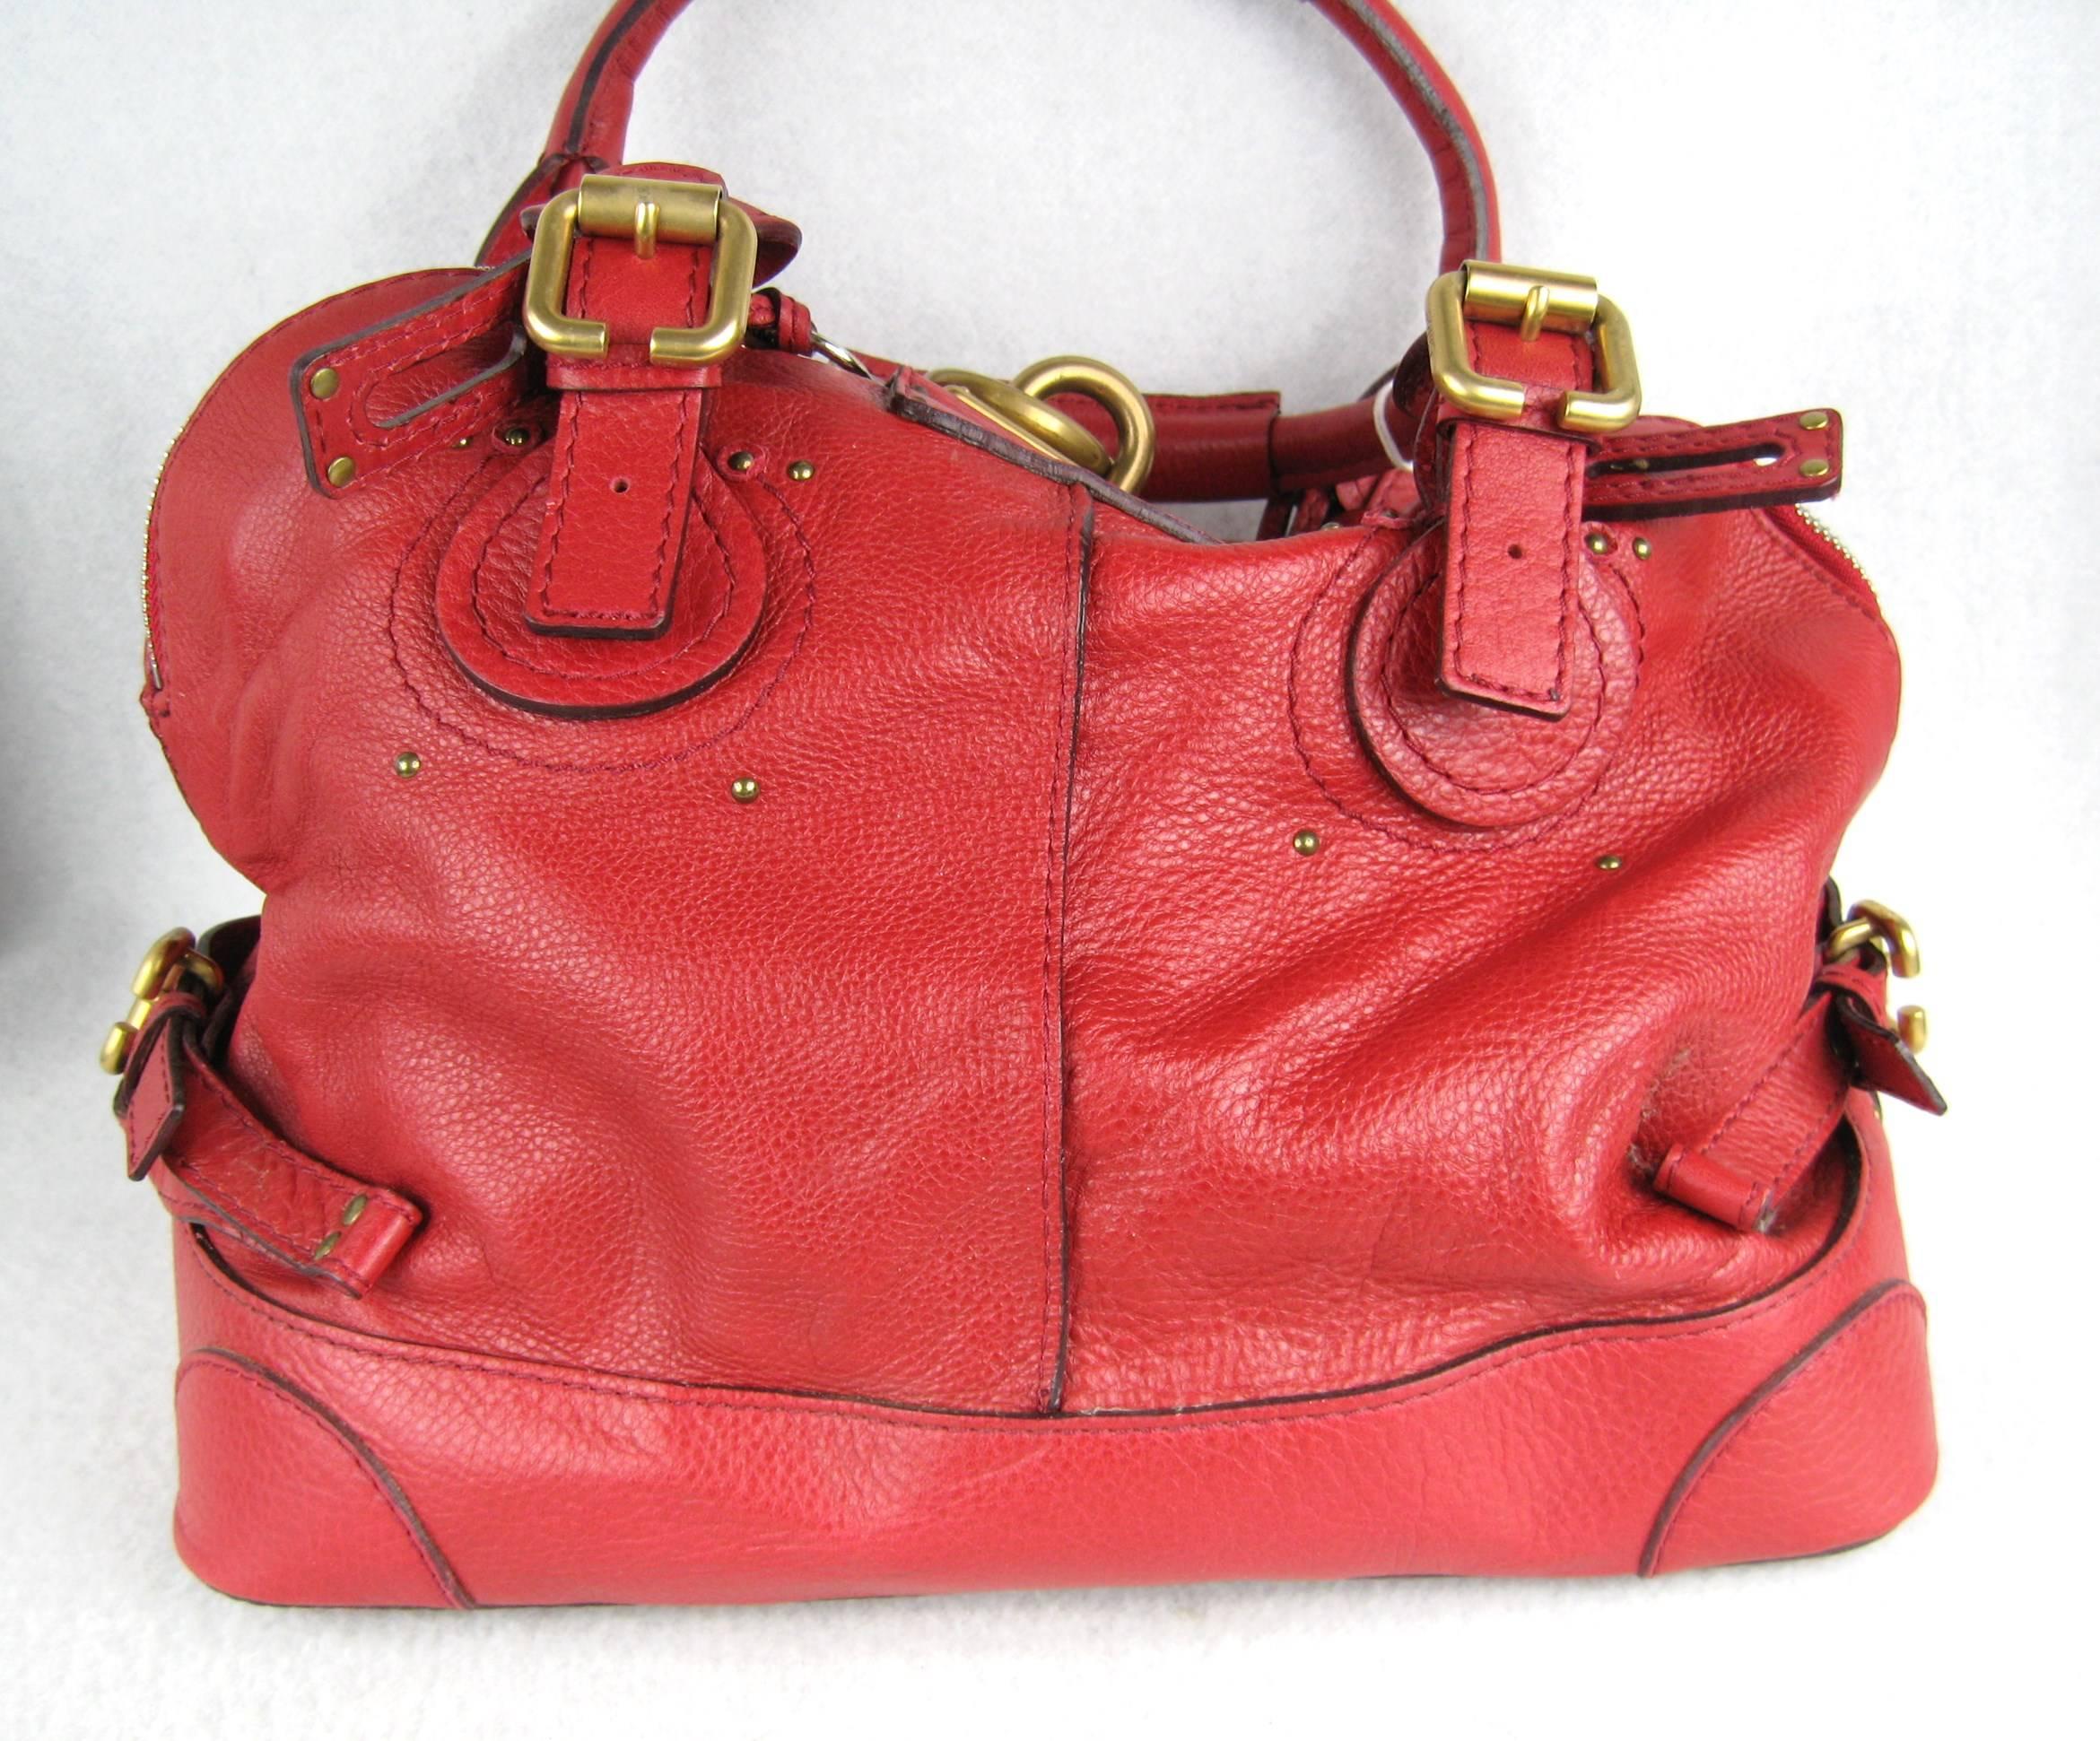 Stunning Red Leather Chloe Bag. Large over sized Brass lock with Double Handles Tags still attached. Stored away till now. Measuring 18